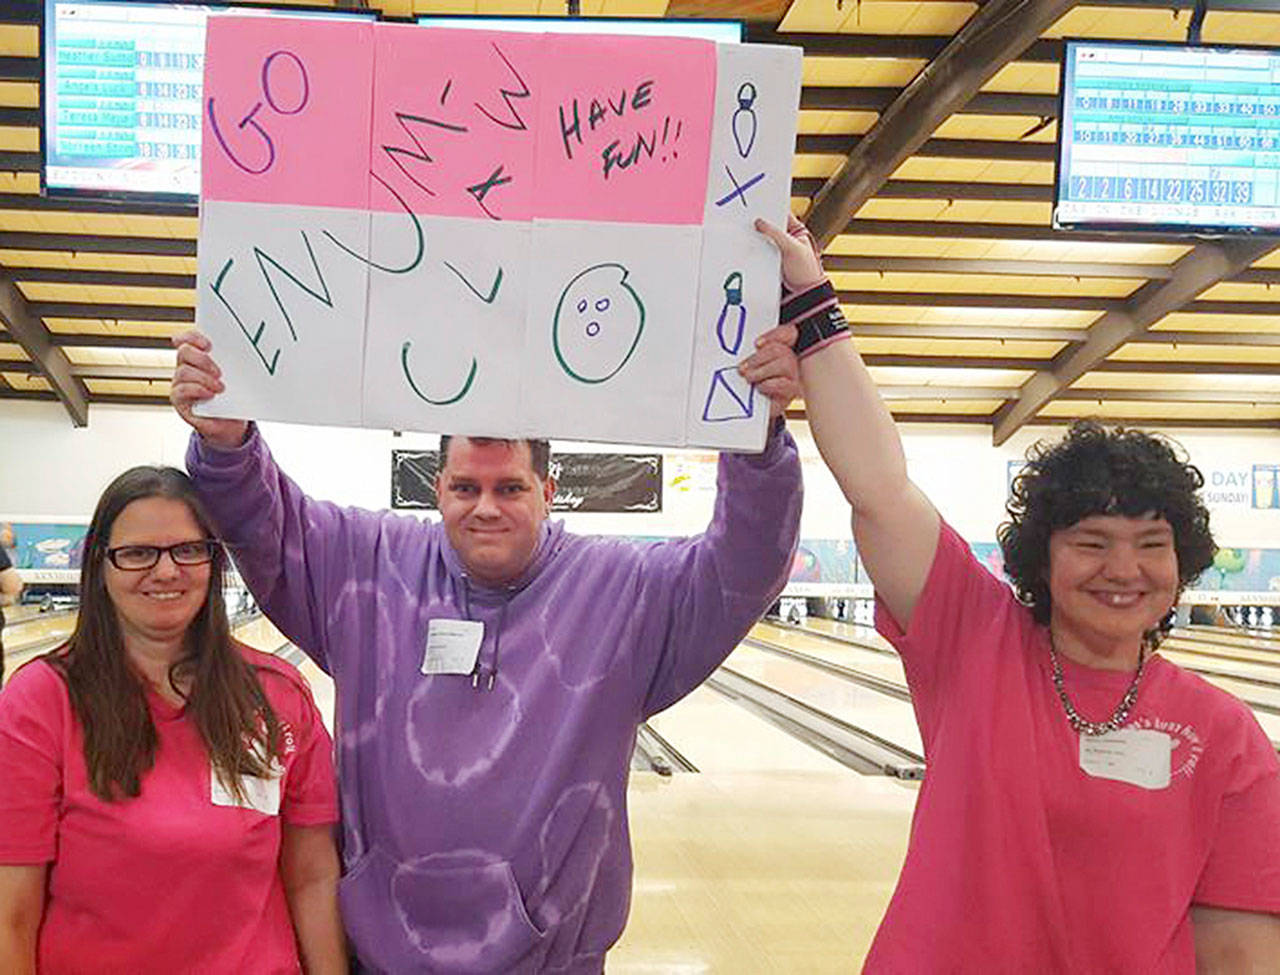 Local Special Olympics bowlers were, from left, Katie Baune, Josh Warren and Stacie Johnson. Submitted photo